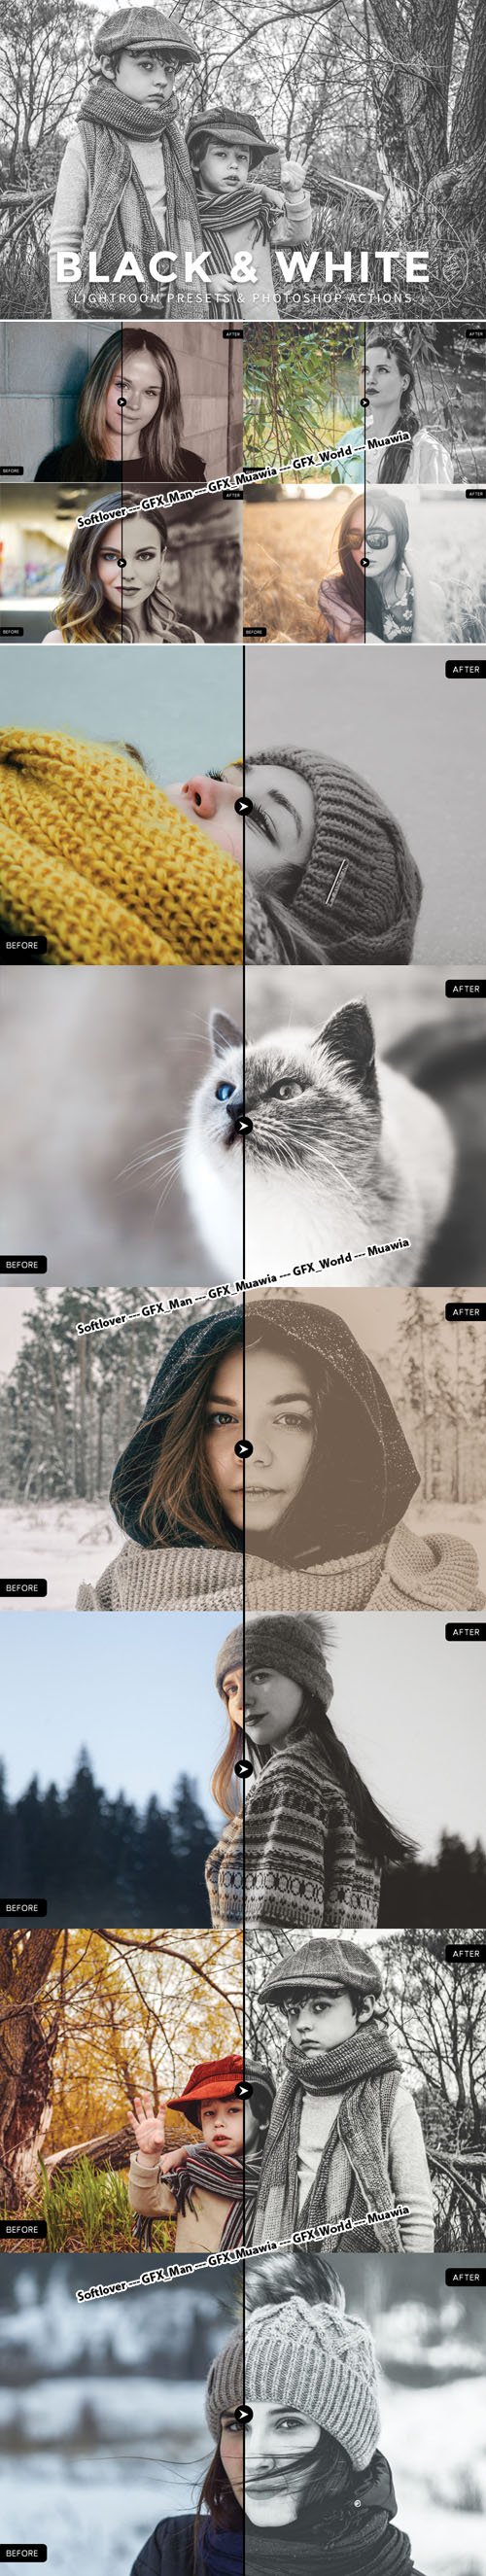 10 Black & White Presets for Lightroom, Photoshop and CameraRaw [lrtemplate/ATN/XMP]